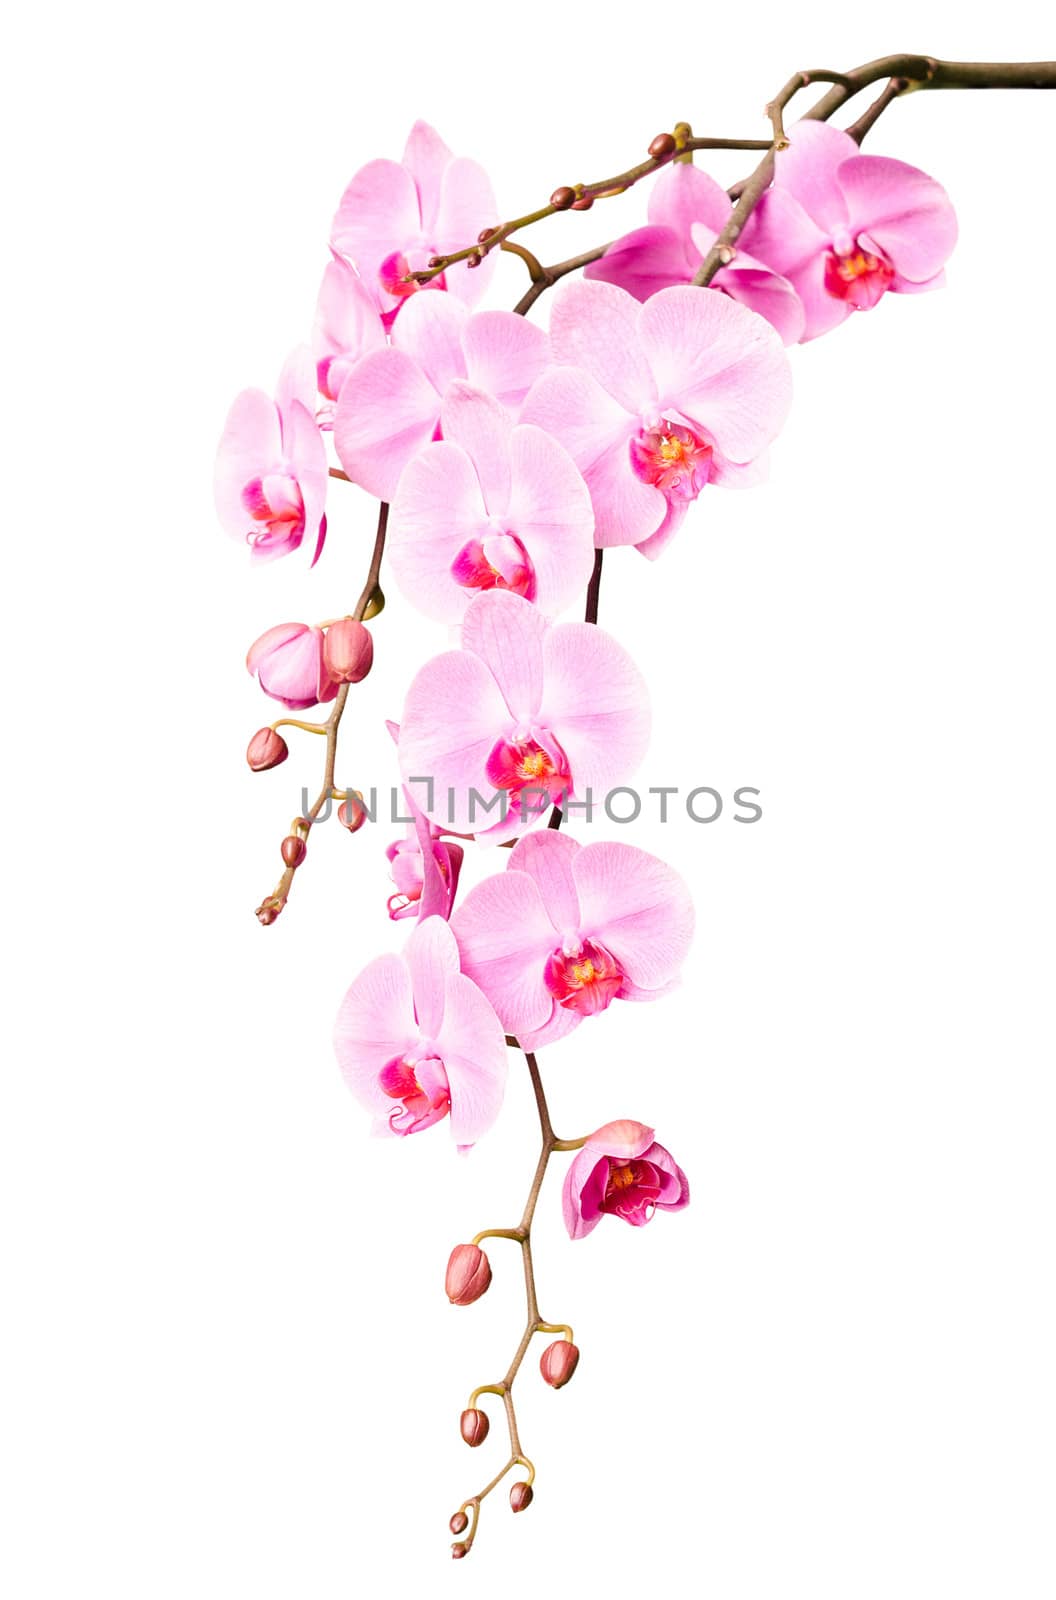 Big beautiful branch of pink orchid flowers with buds isolated on white